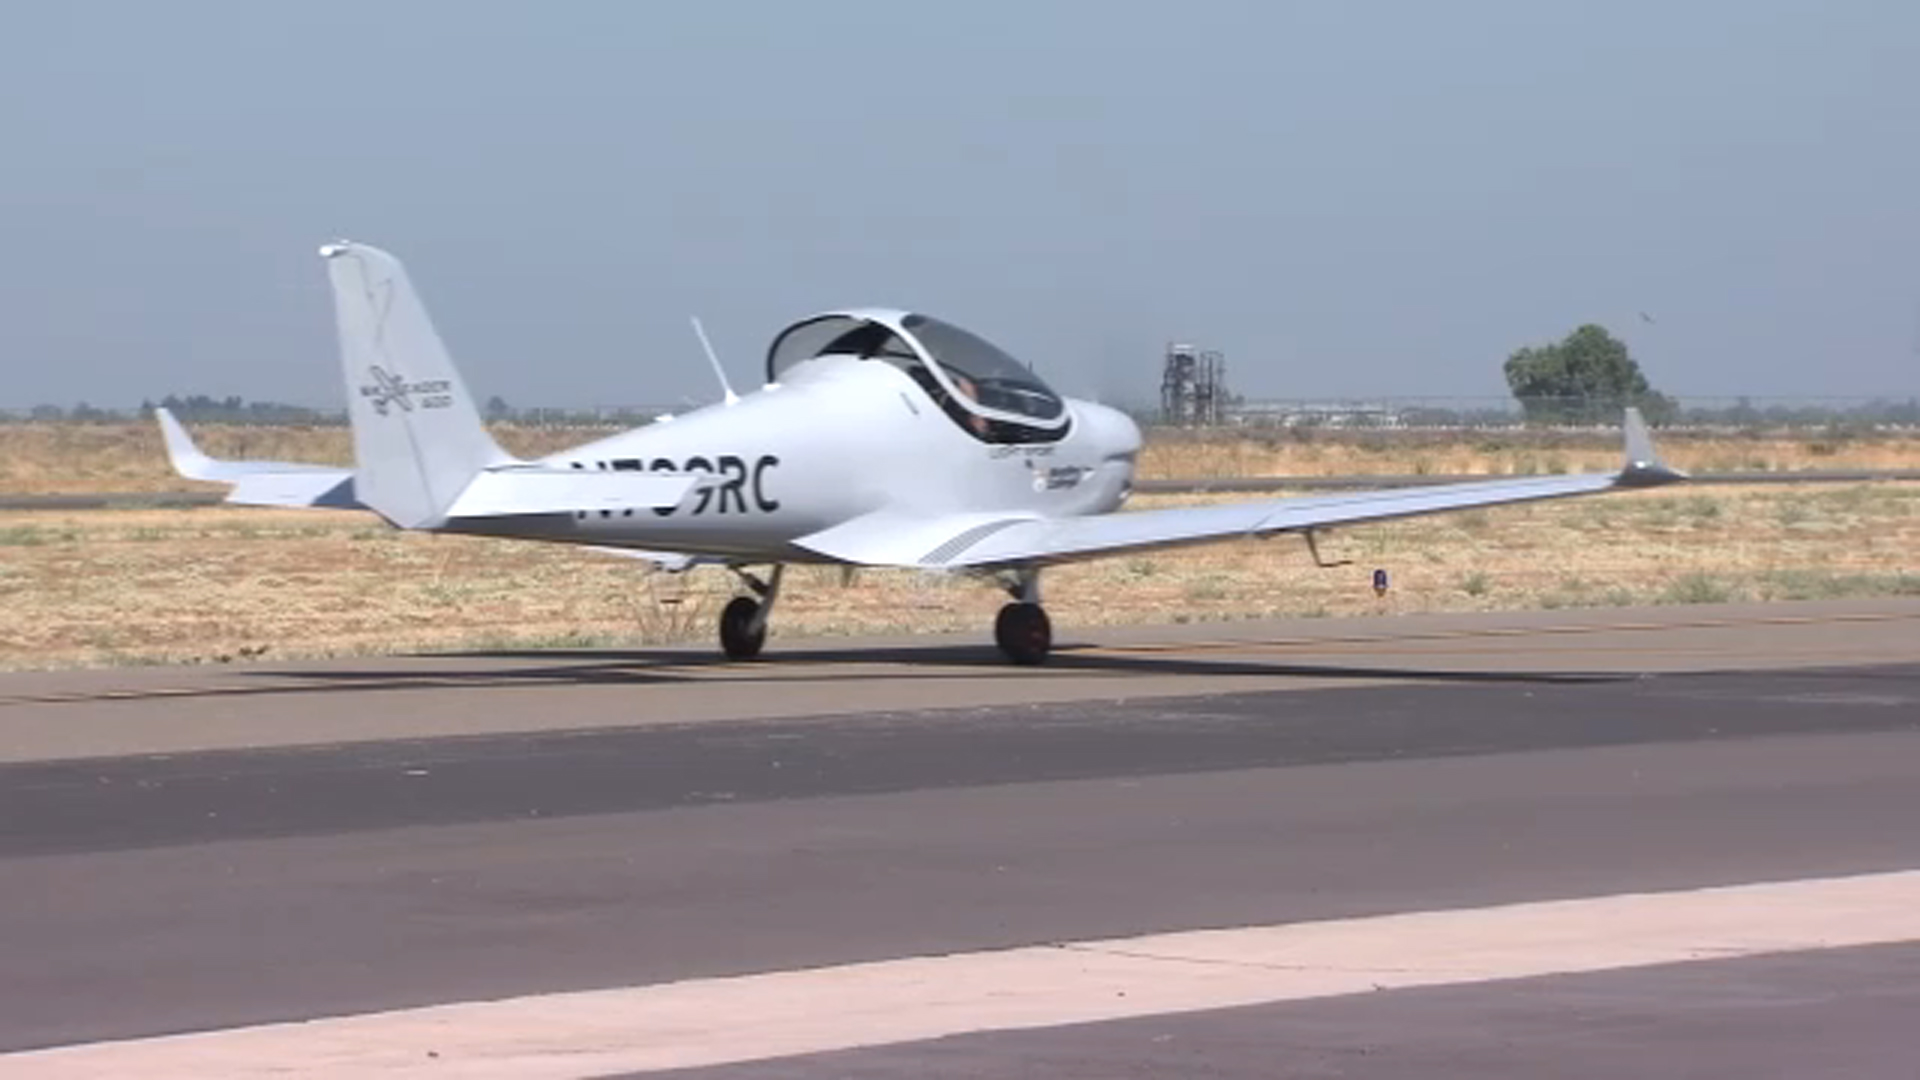 Reedley College adding 5 new airplanes to its flight science program